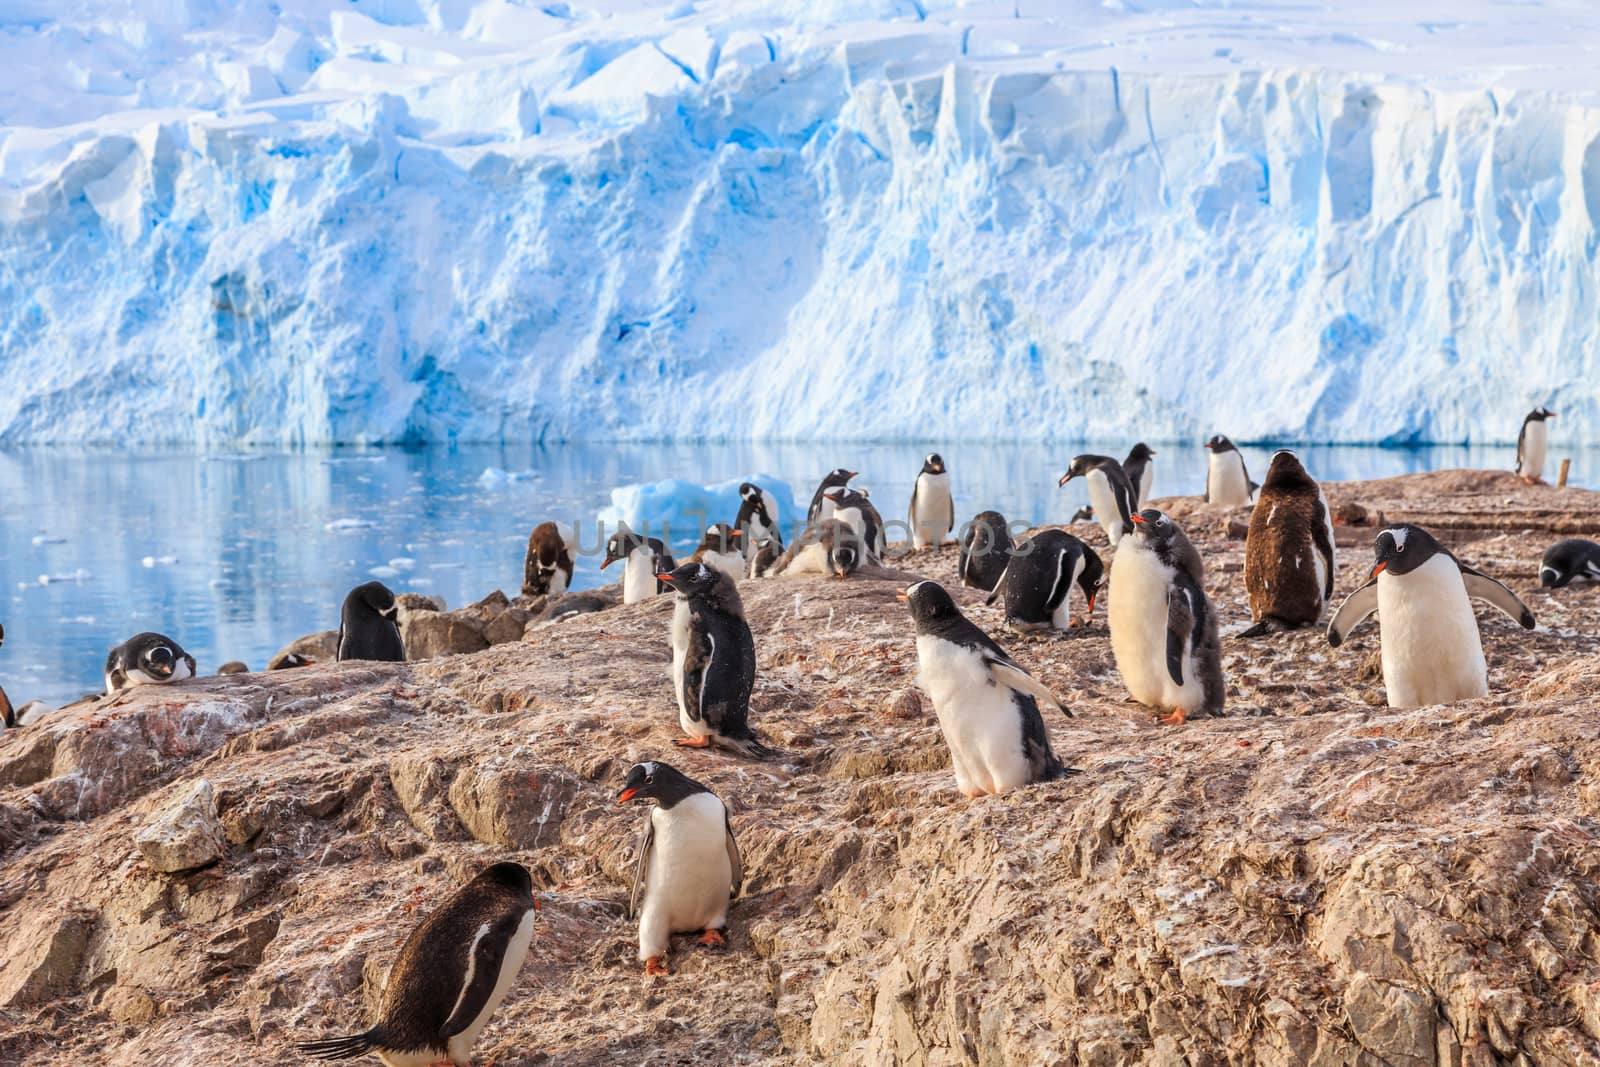 Various gentoo penguins overcrowded the rocky coastline and glac by ambeon